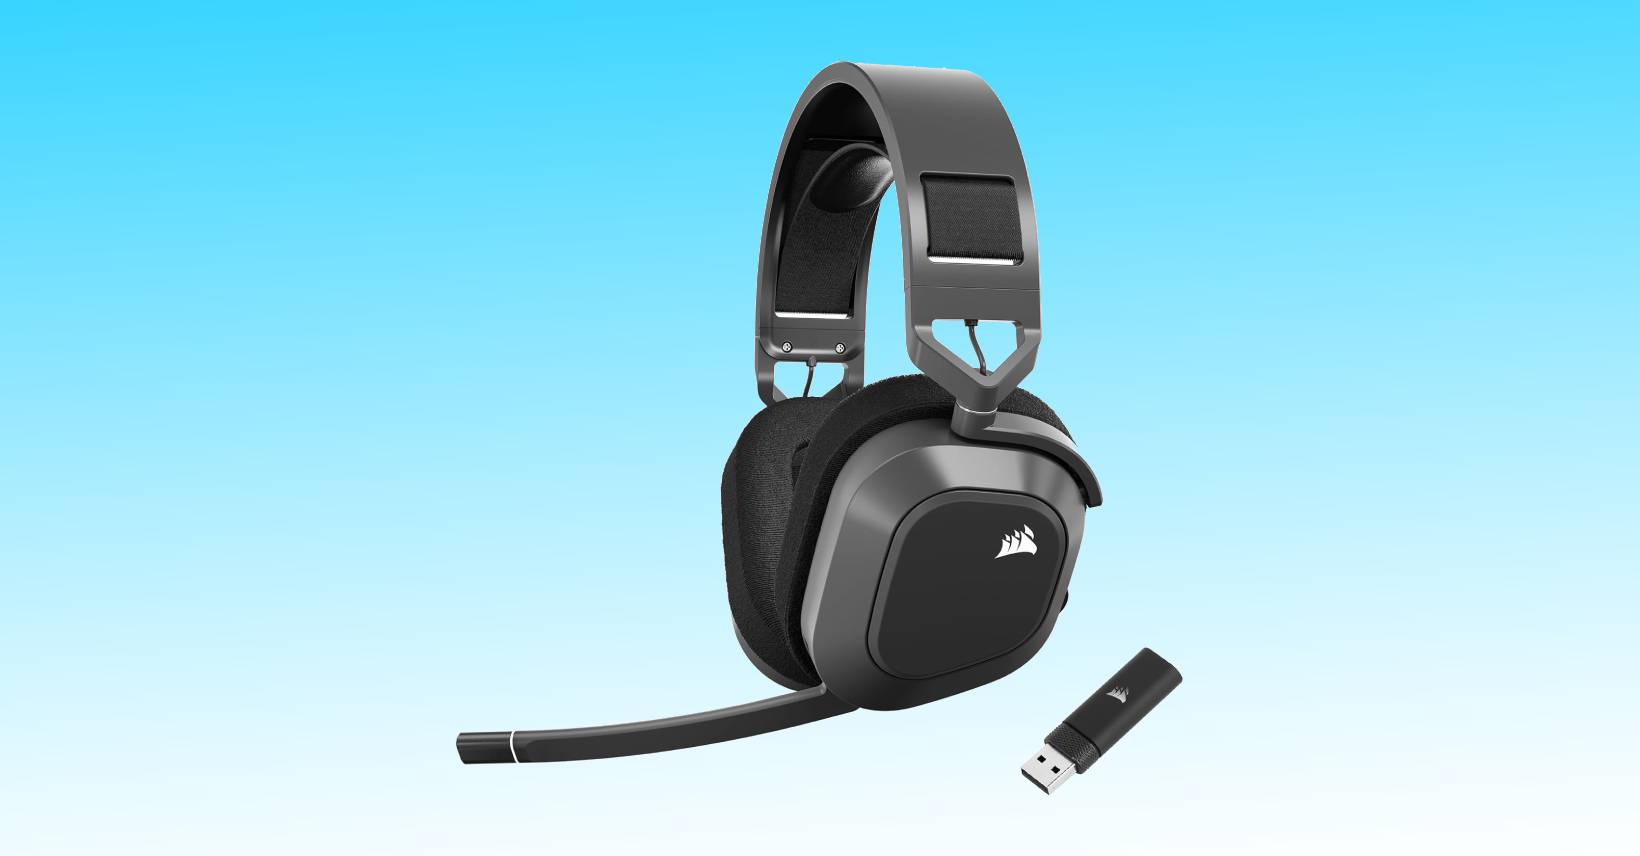 Save big on the MAX Corsair Guide - headset deal HS80 wireless gaming Black with Friday PC